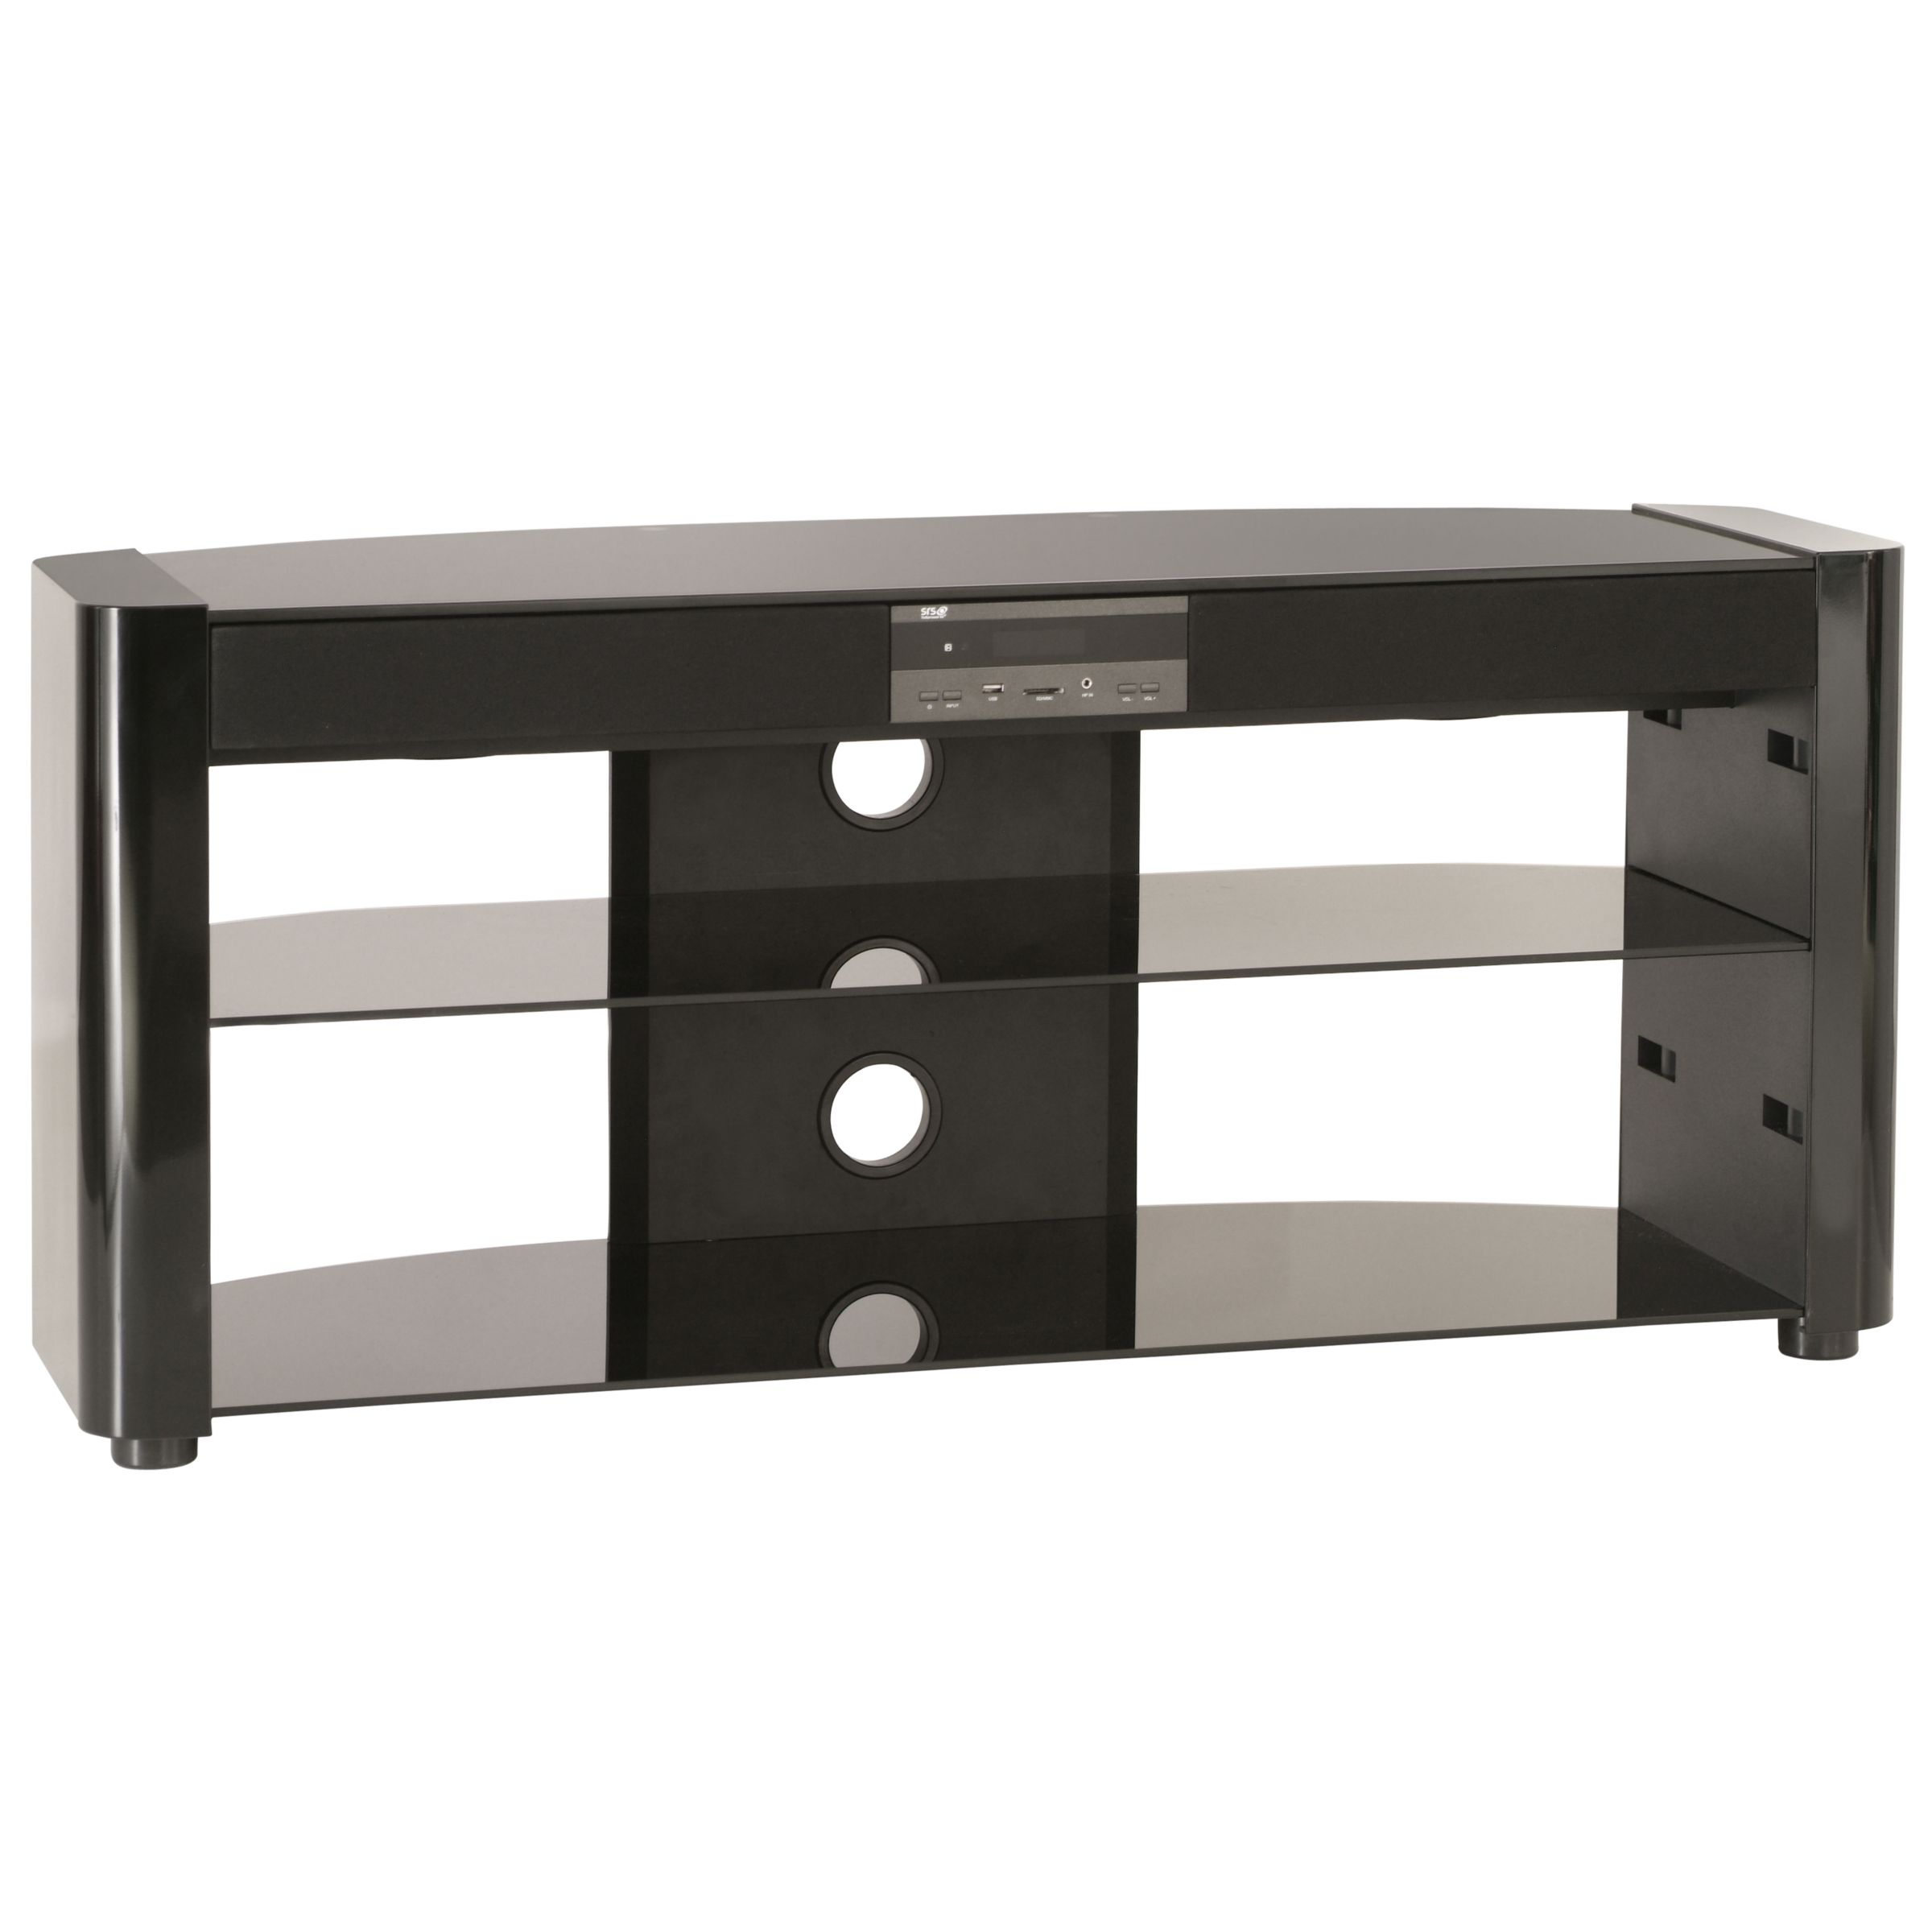 TTAP Sound Stand L603-A TV Stand/Home Cinema System at John Lewis